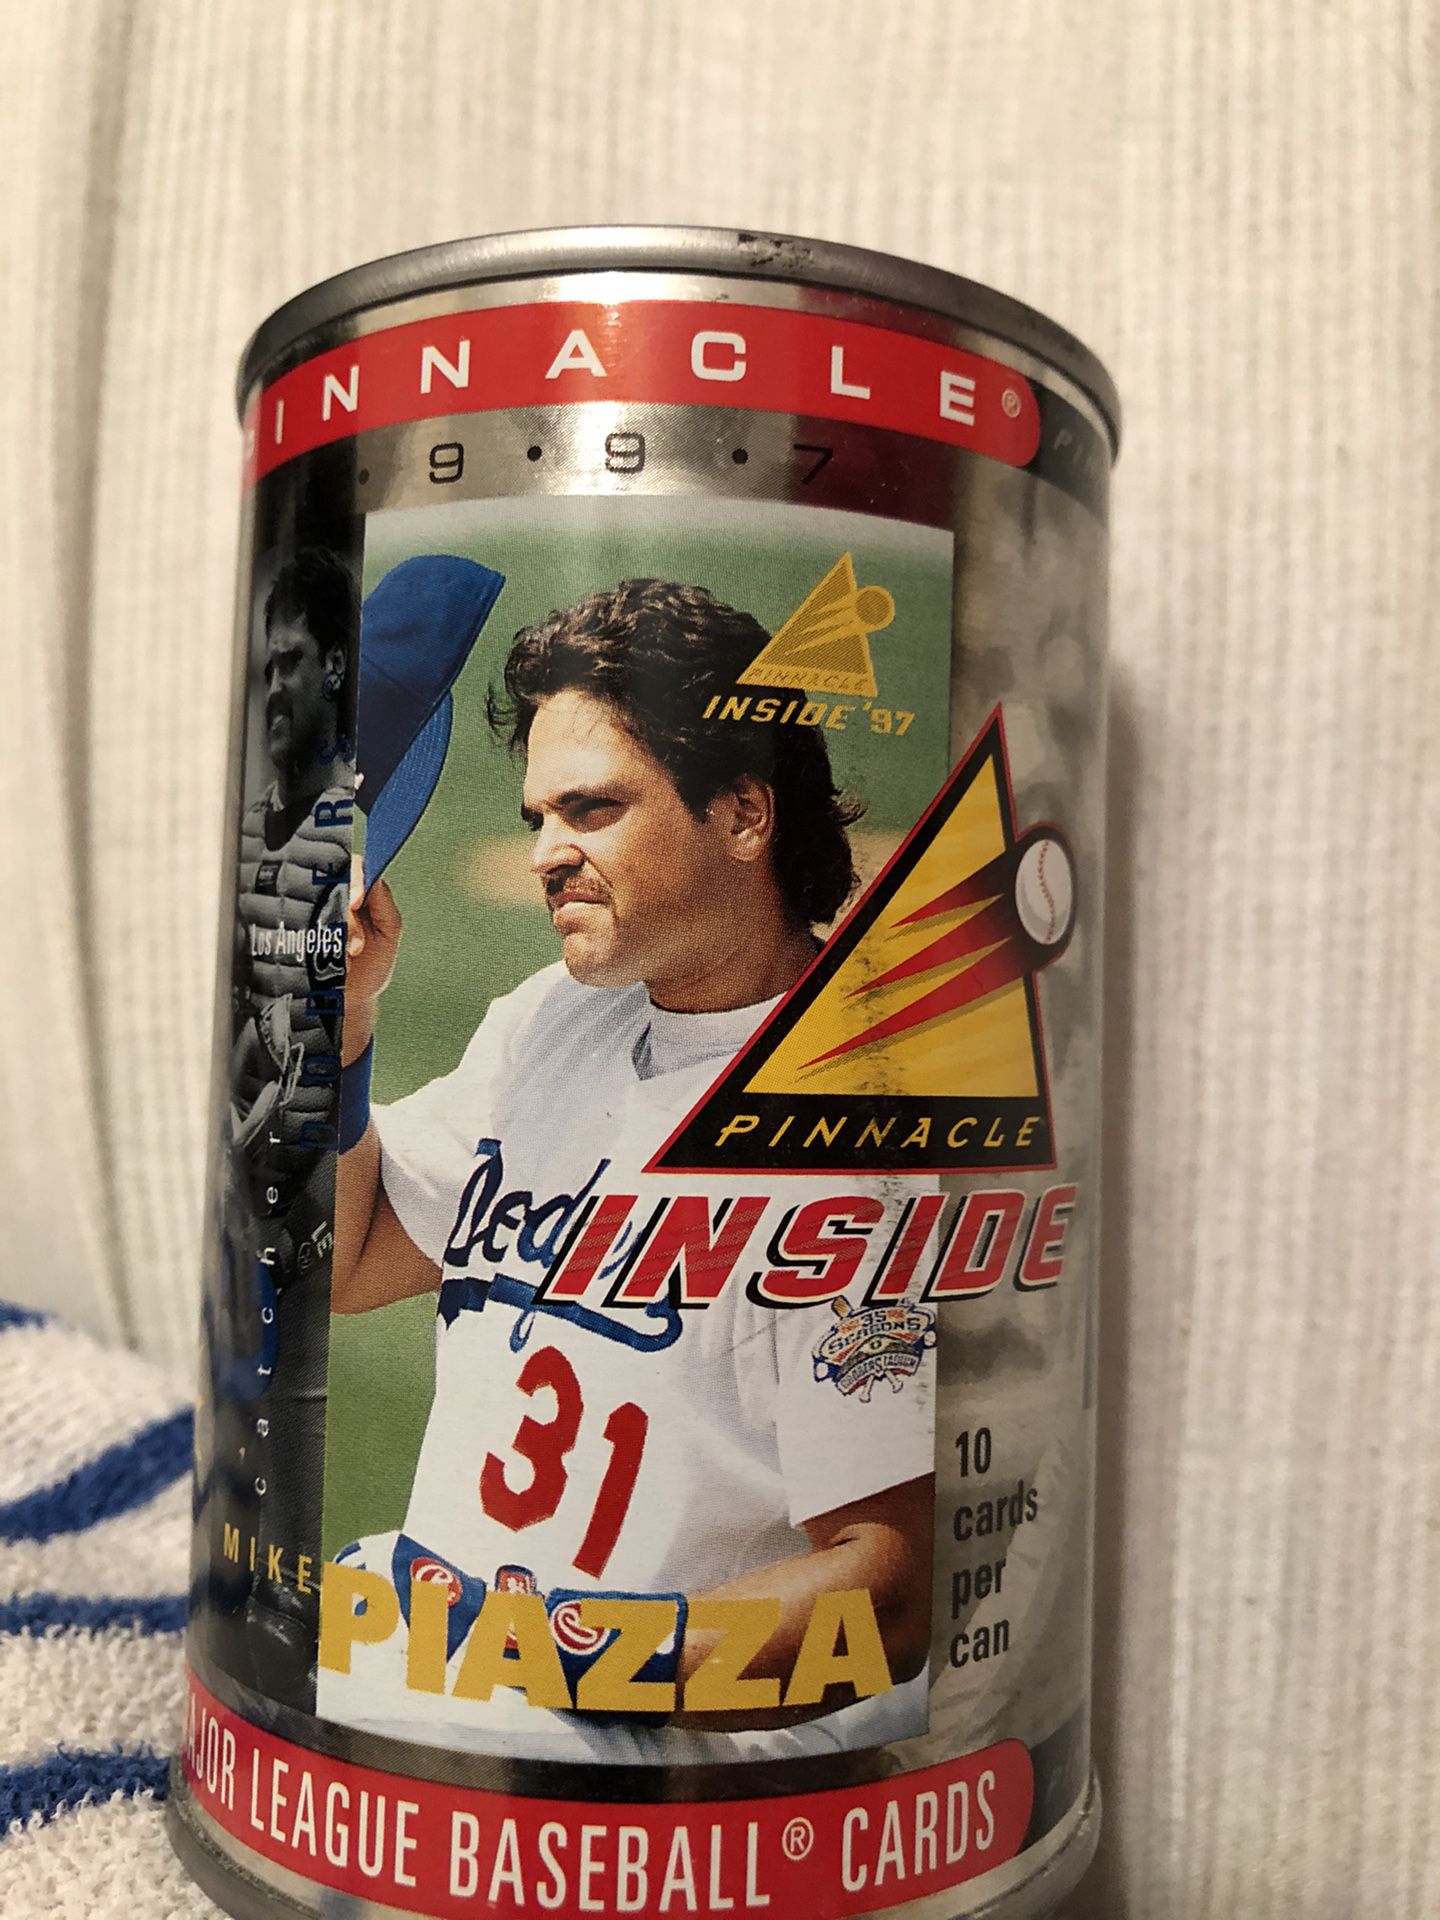 LA Dodgers Hall Of Famer Mike Piazza 1997 Pinnacle baseball cards can